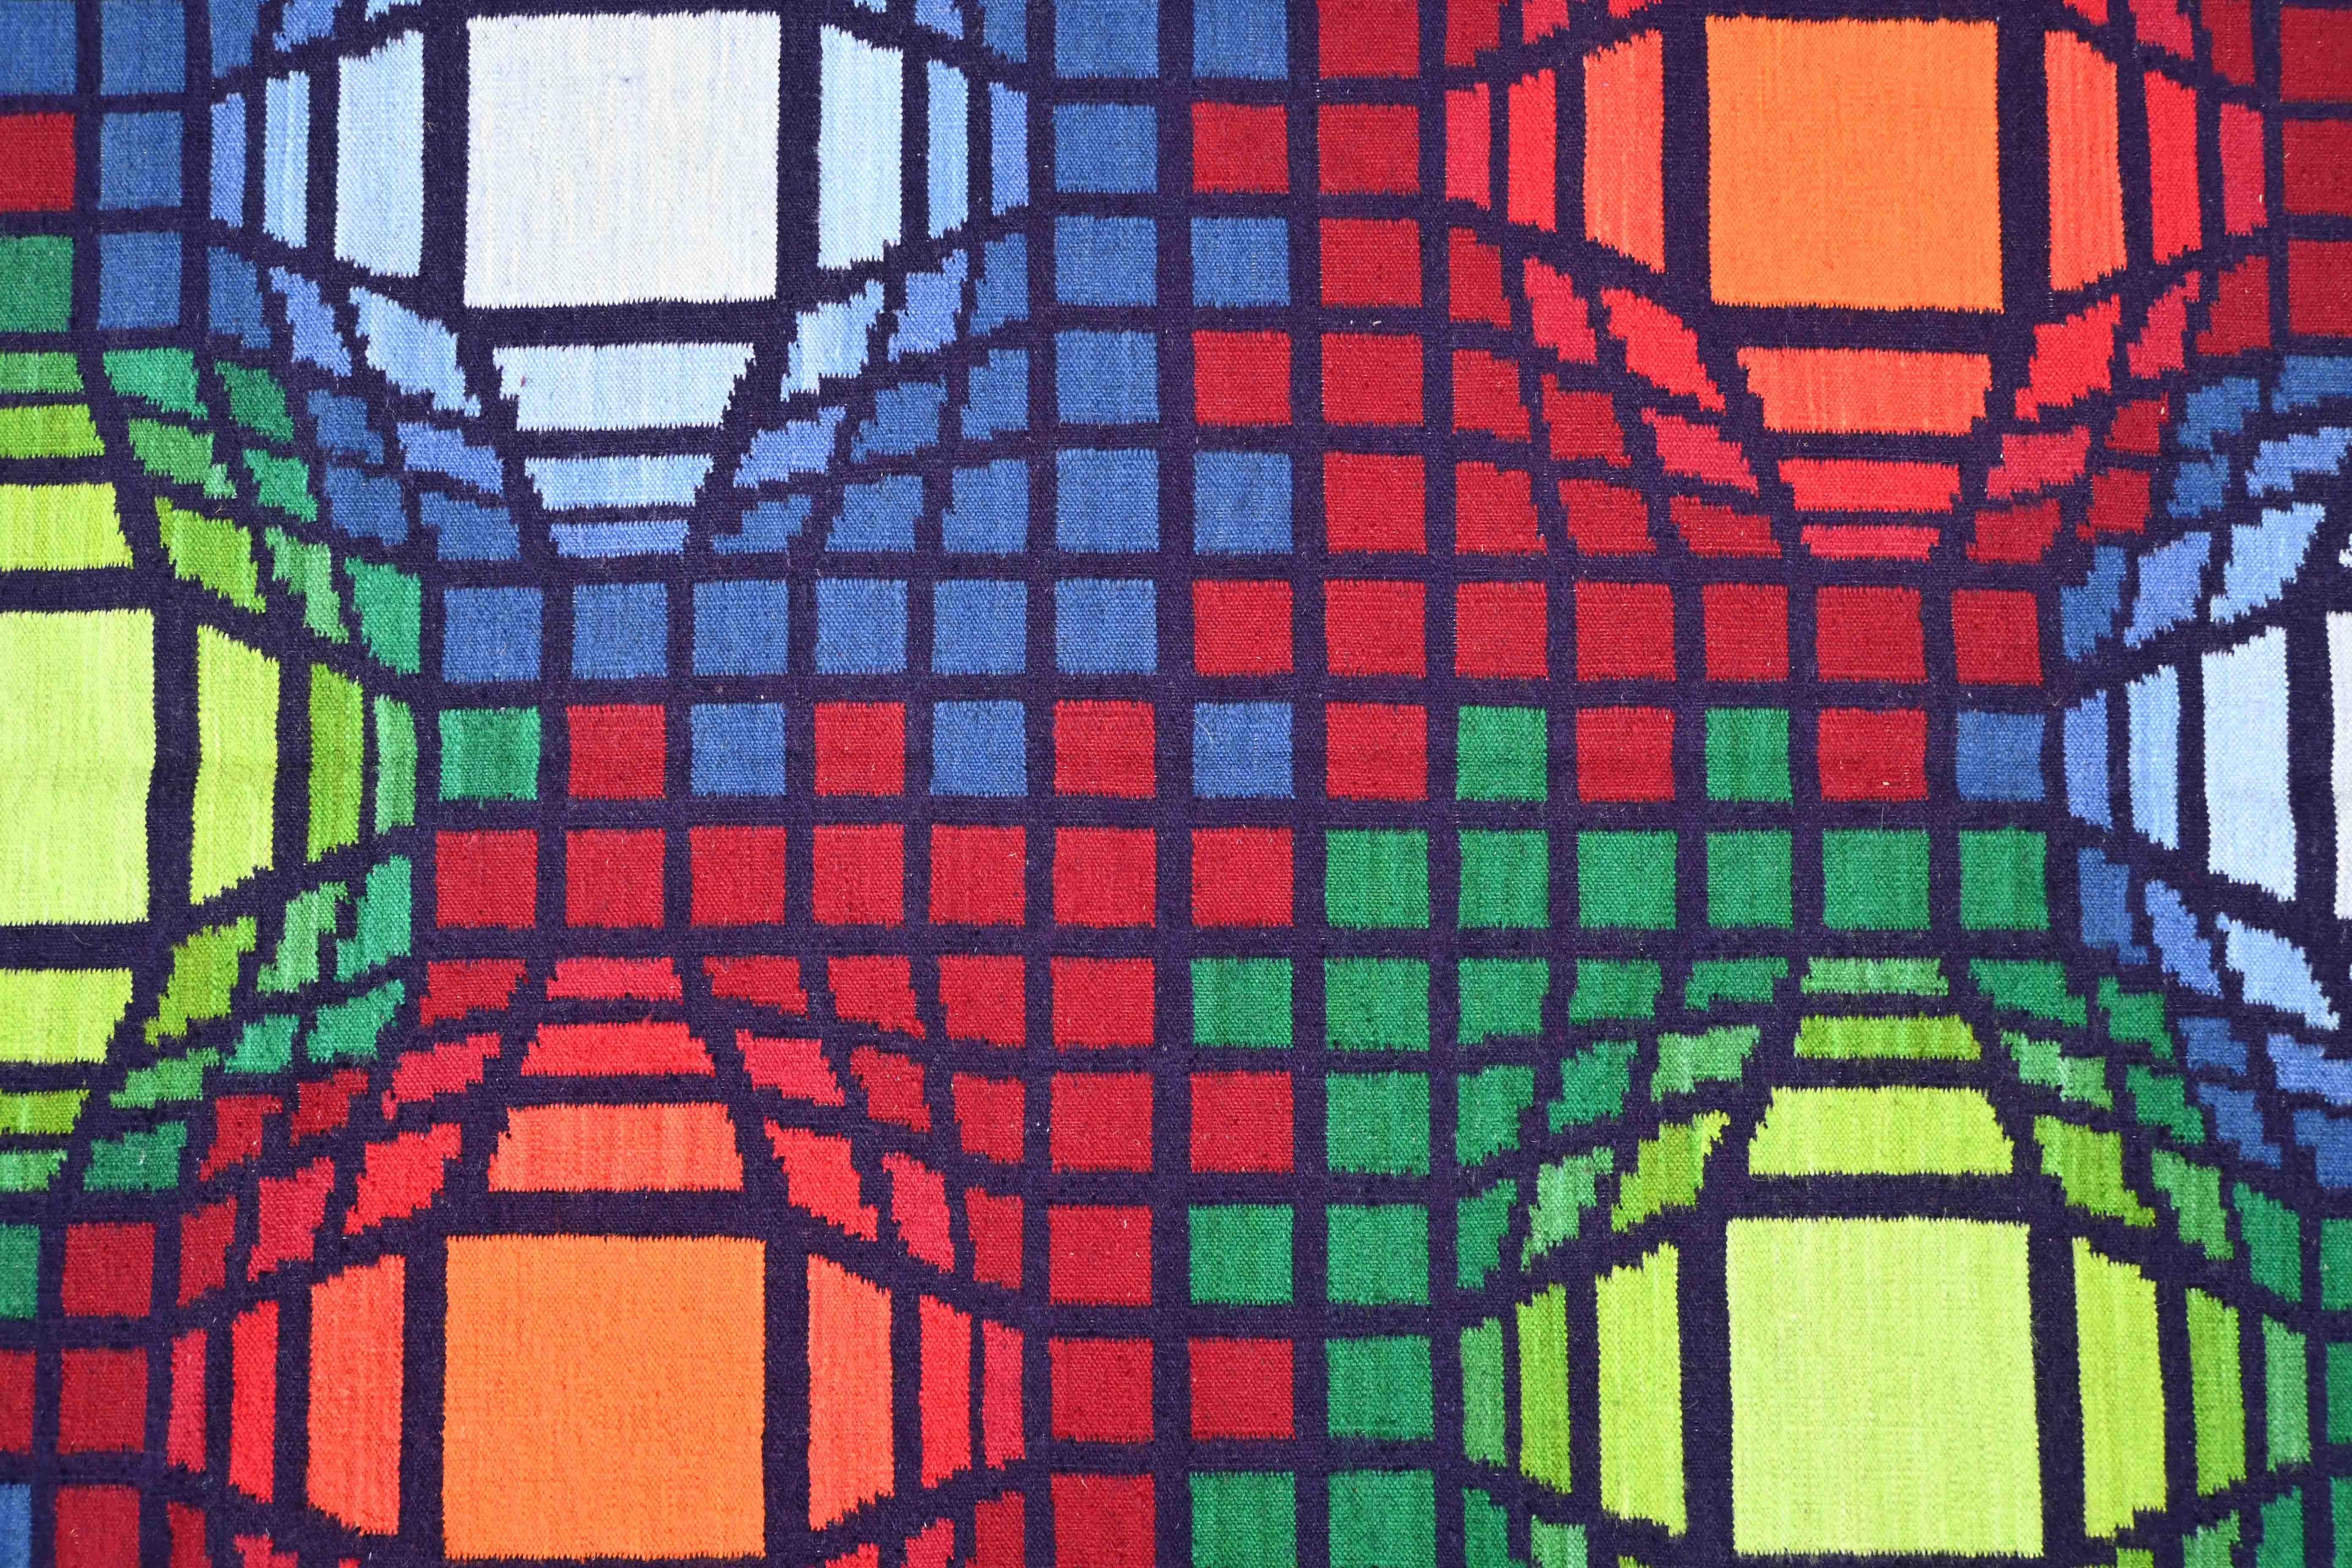 Hand-Woven Kinetic Tapestry LM1985 Signed Jakubczyk - In the style of Vasarely - No. 1377 For Sale